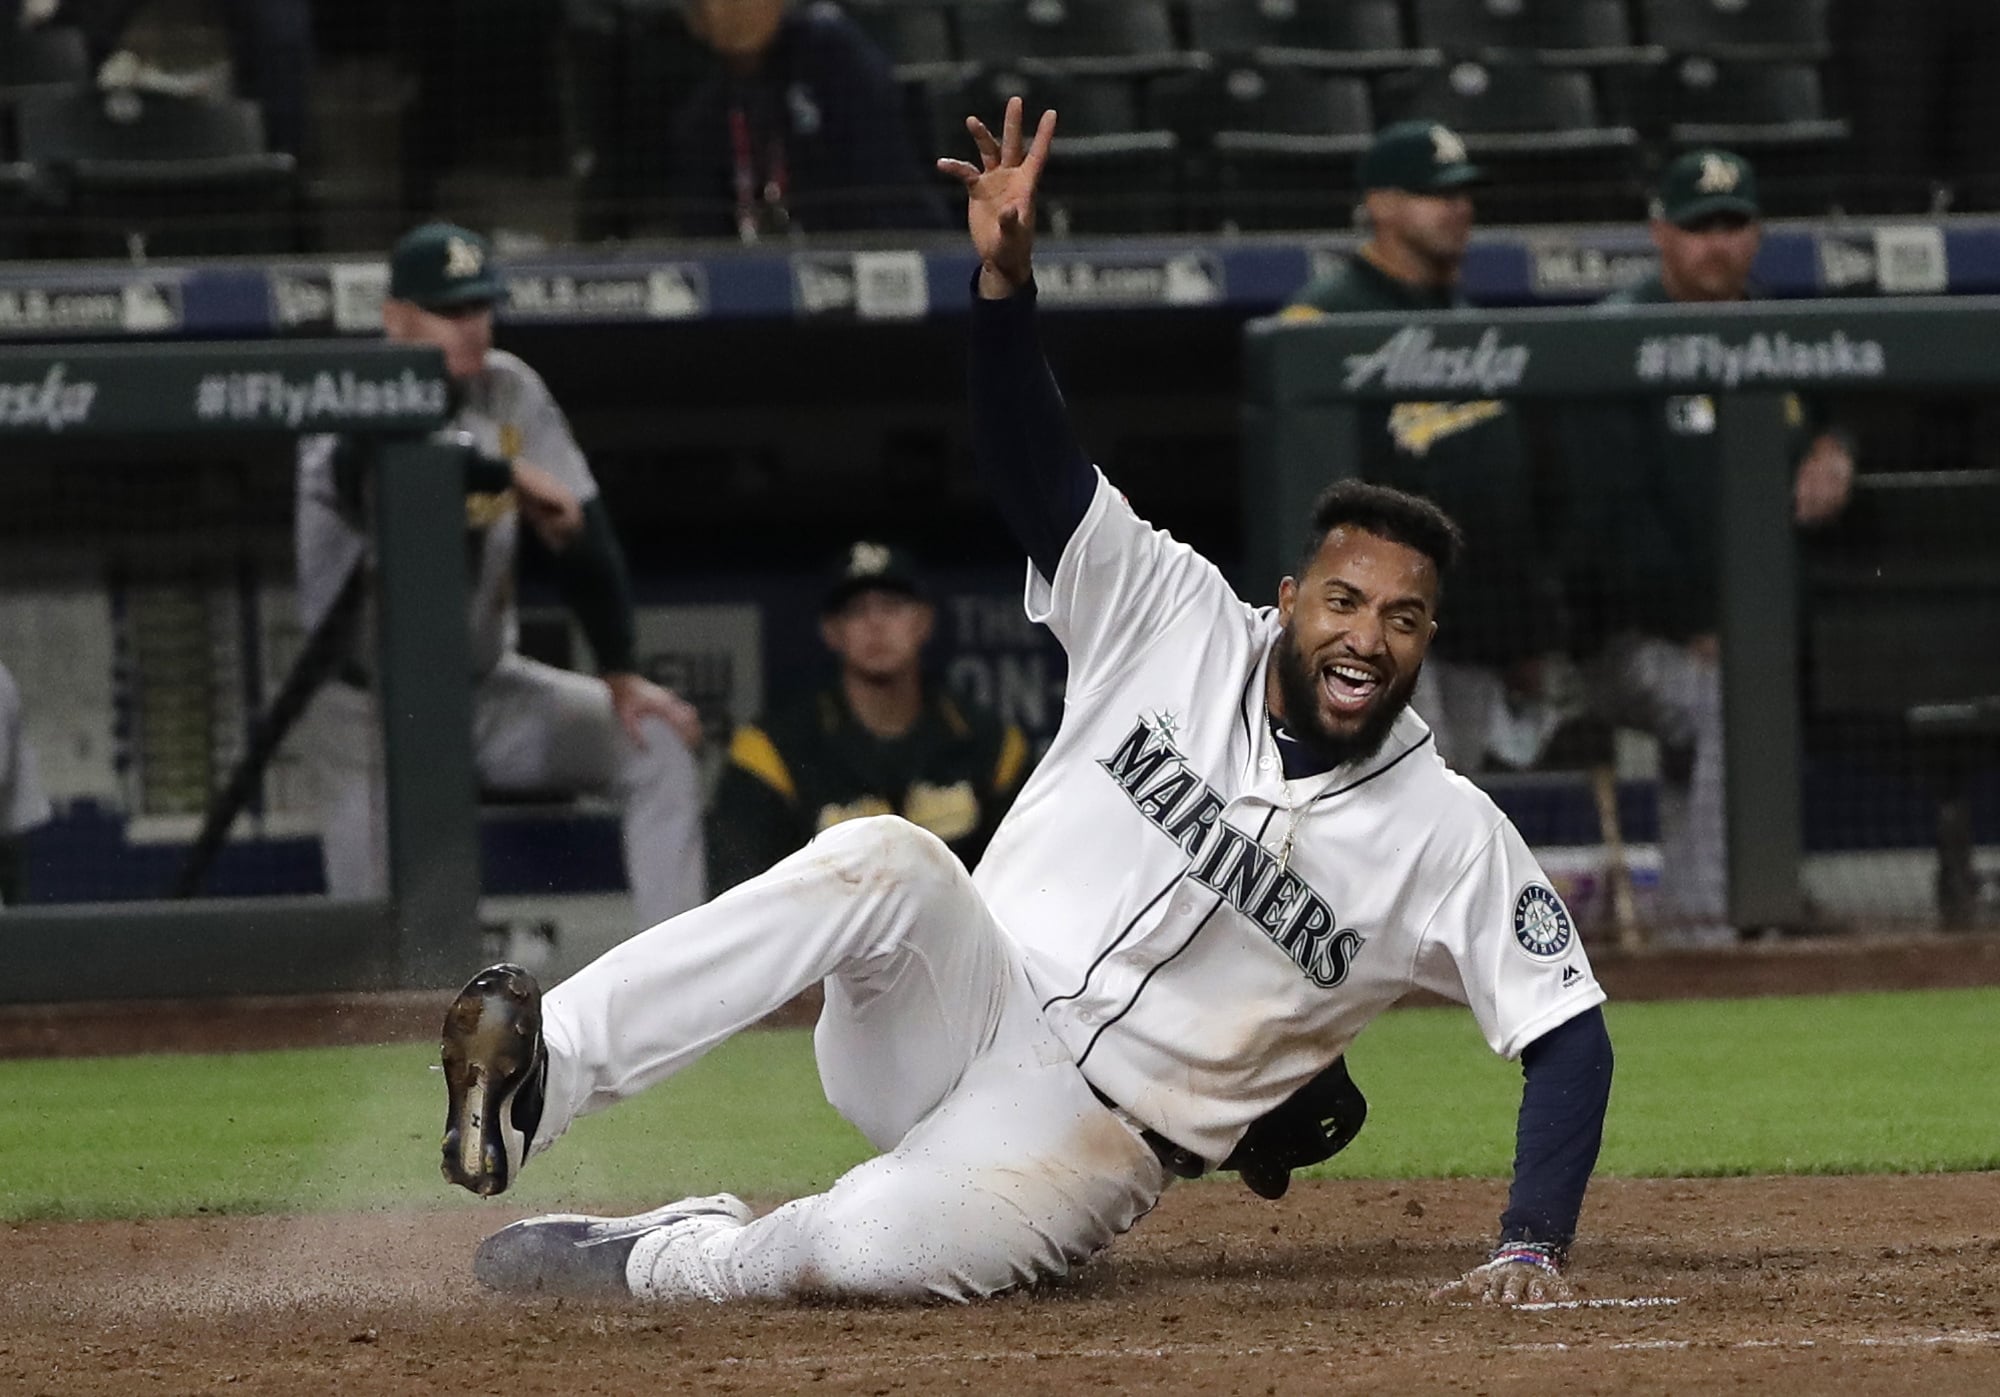 Seattle Mariners' Domingo Santana scores on a walk-off single hit by Omar Narvaez during the 10th inning of a baseball game against the Oakland Athletics, Monday, May 13, 2019, in Seattle. The Mariners won 6-5 in 10 innings. (AP Photo/Ted S.